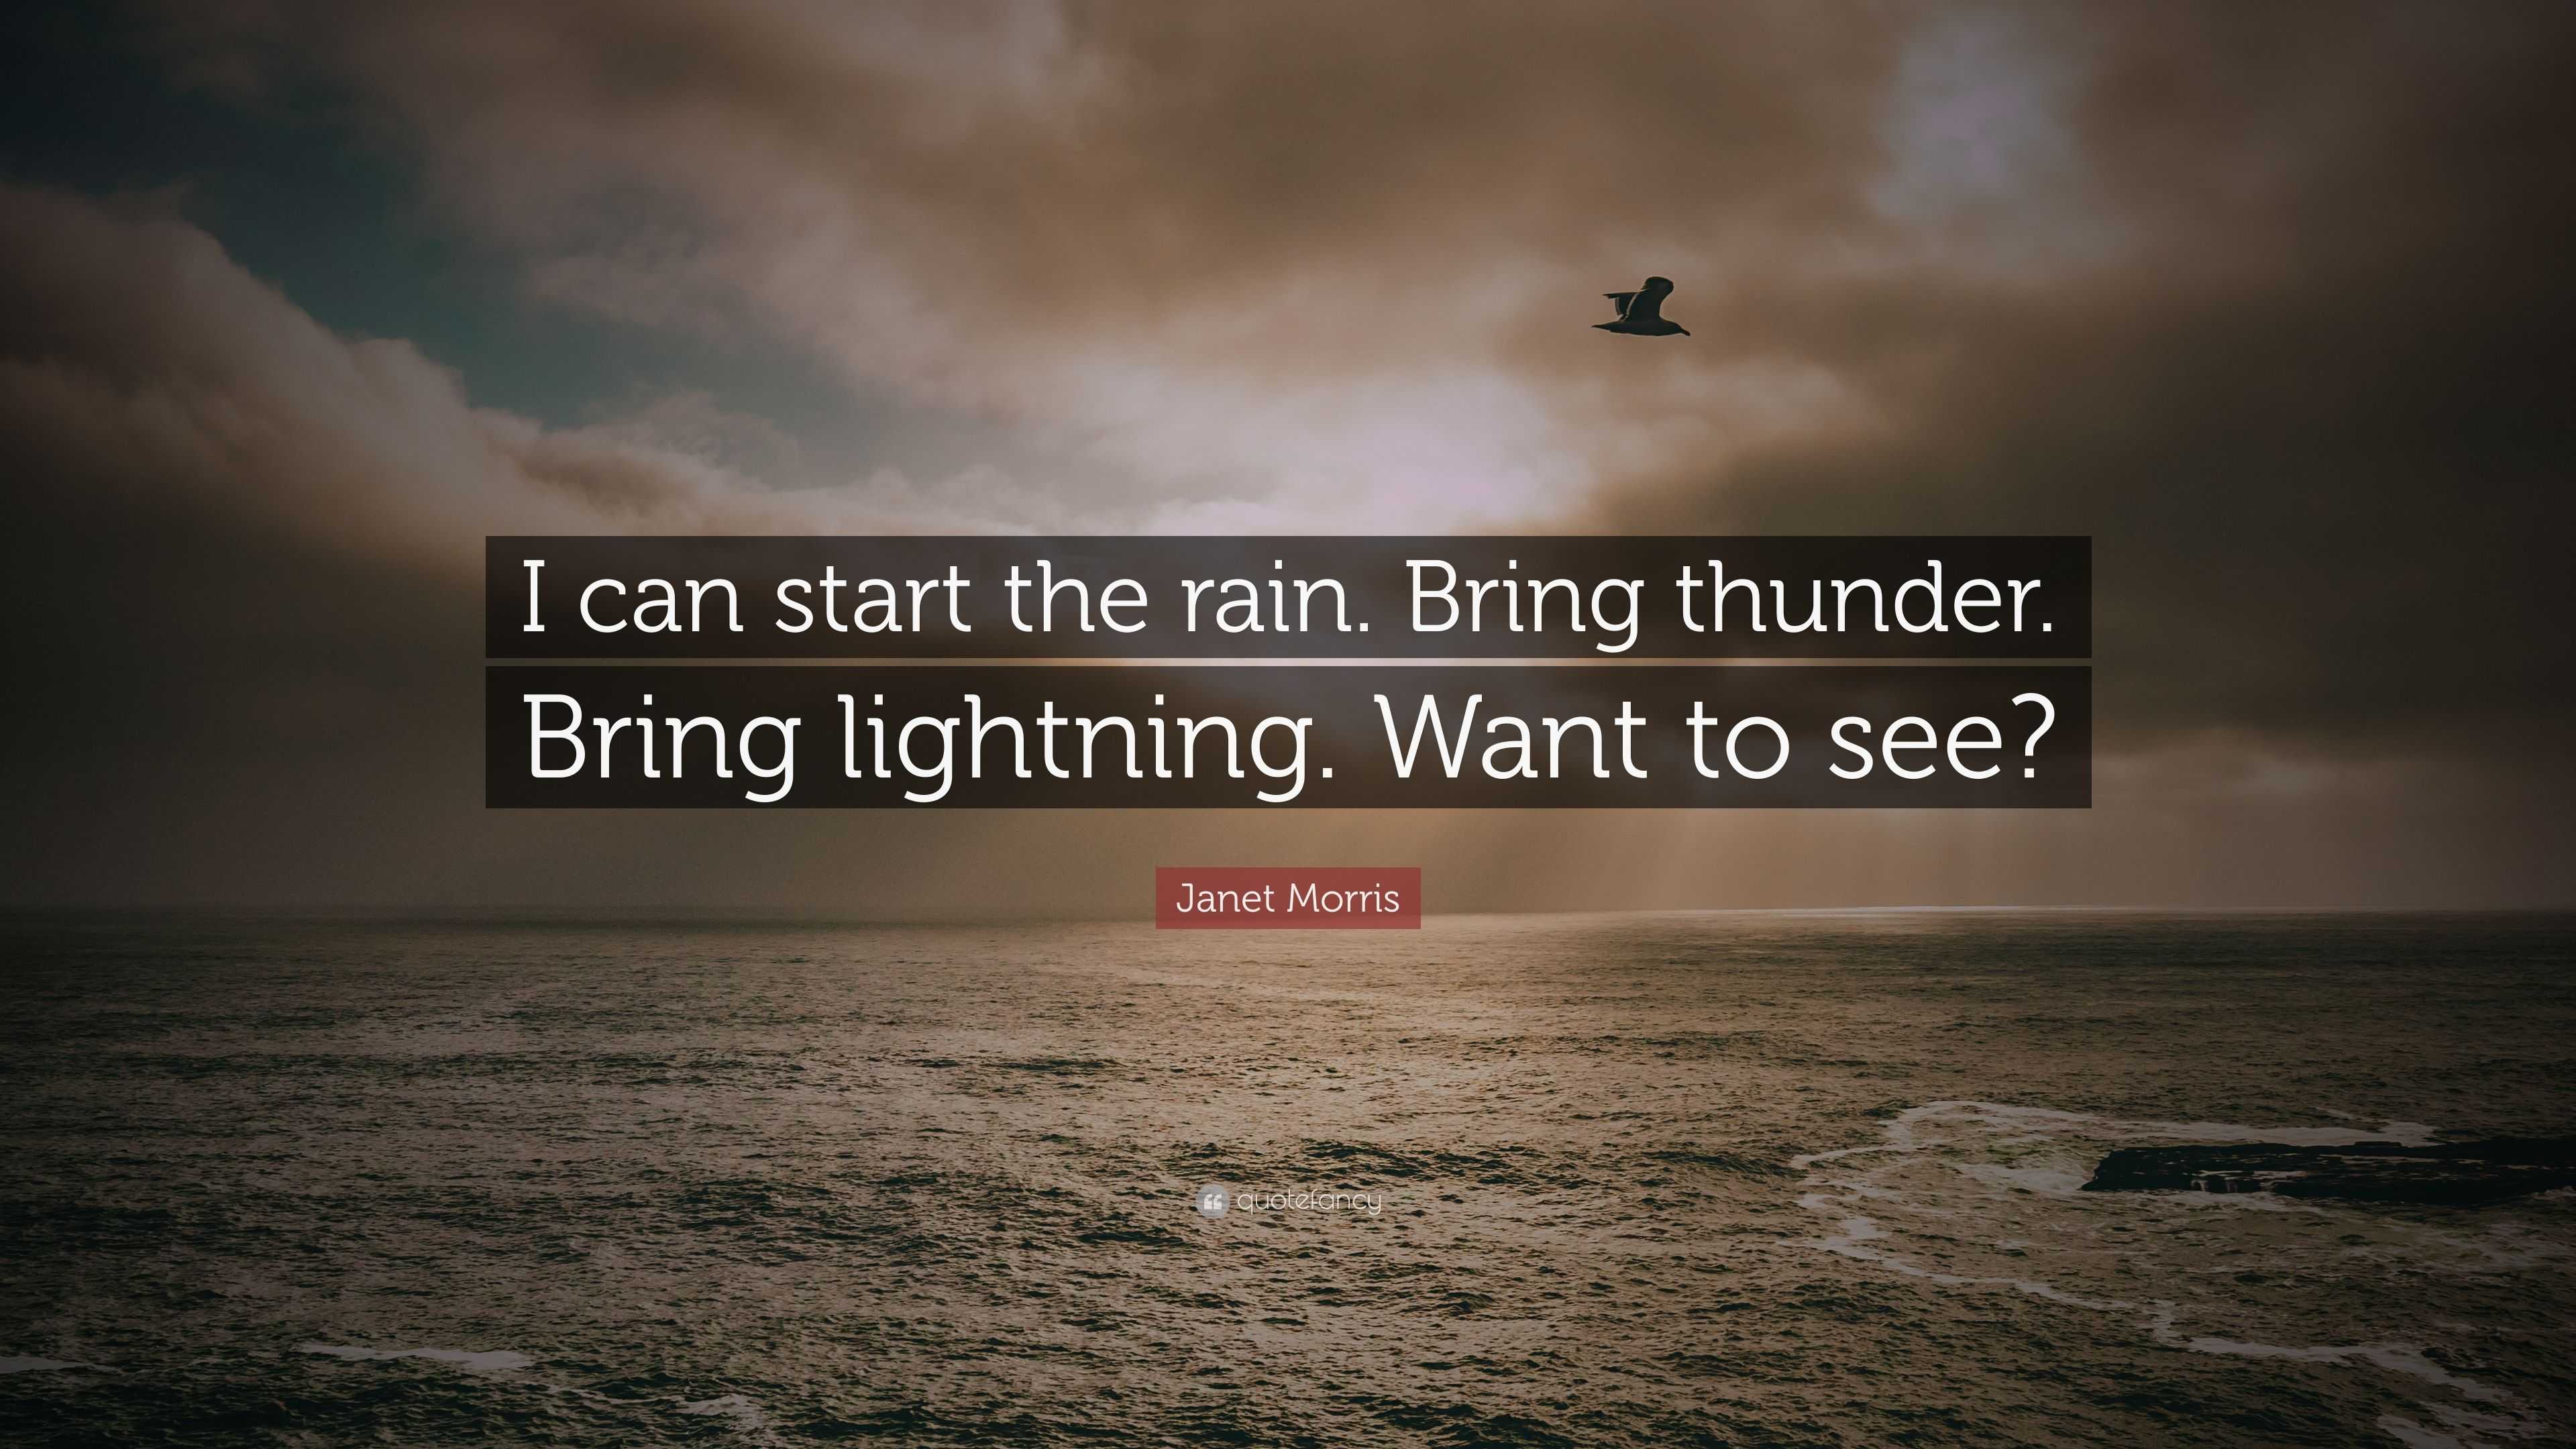 Janet Morris Quote: “I can start the rain. Bring thunder. Bring lightning.  Want to see?”